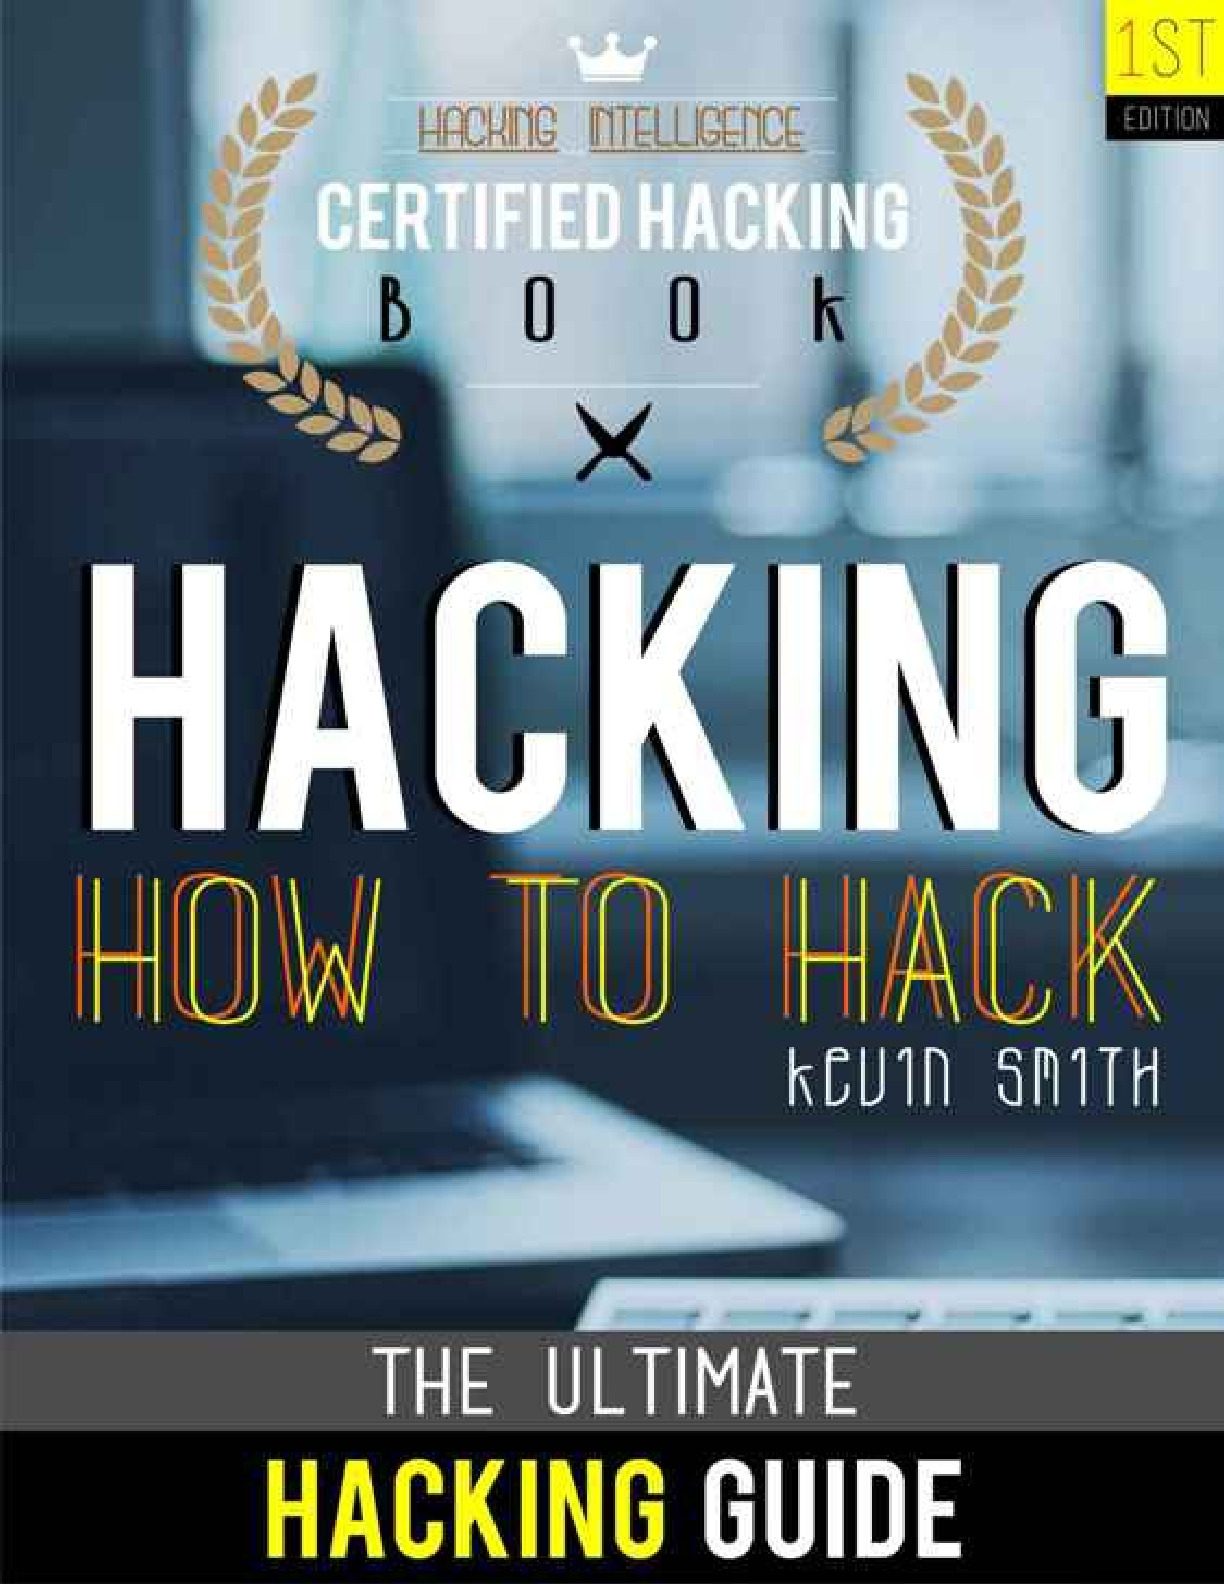 Hacking The Ultimate Hacking for Beginners How to Hack Hacking Intelligence Certified Hacking Book